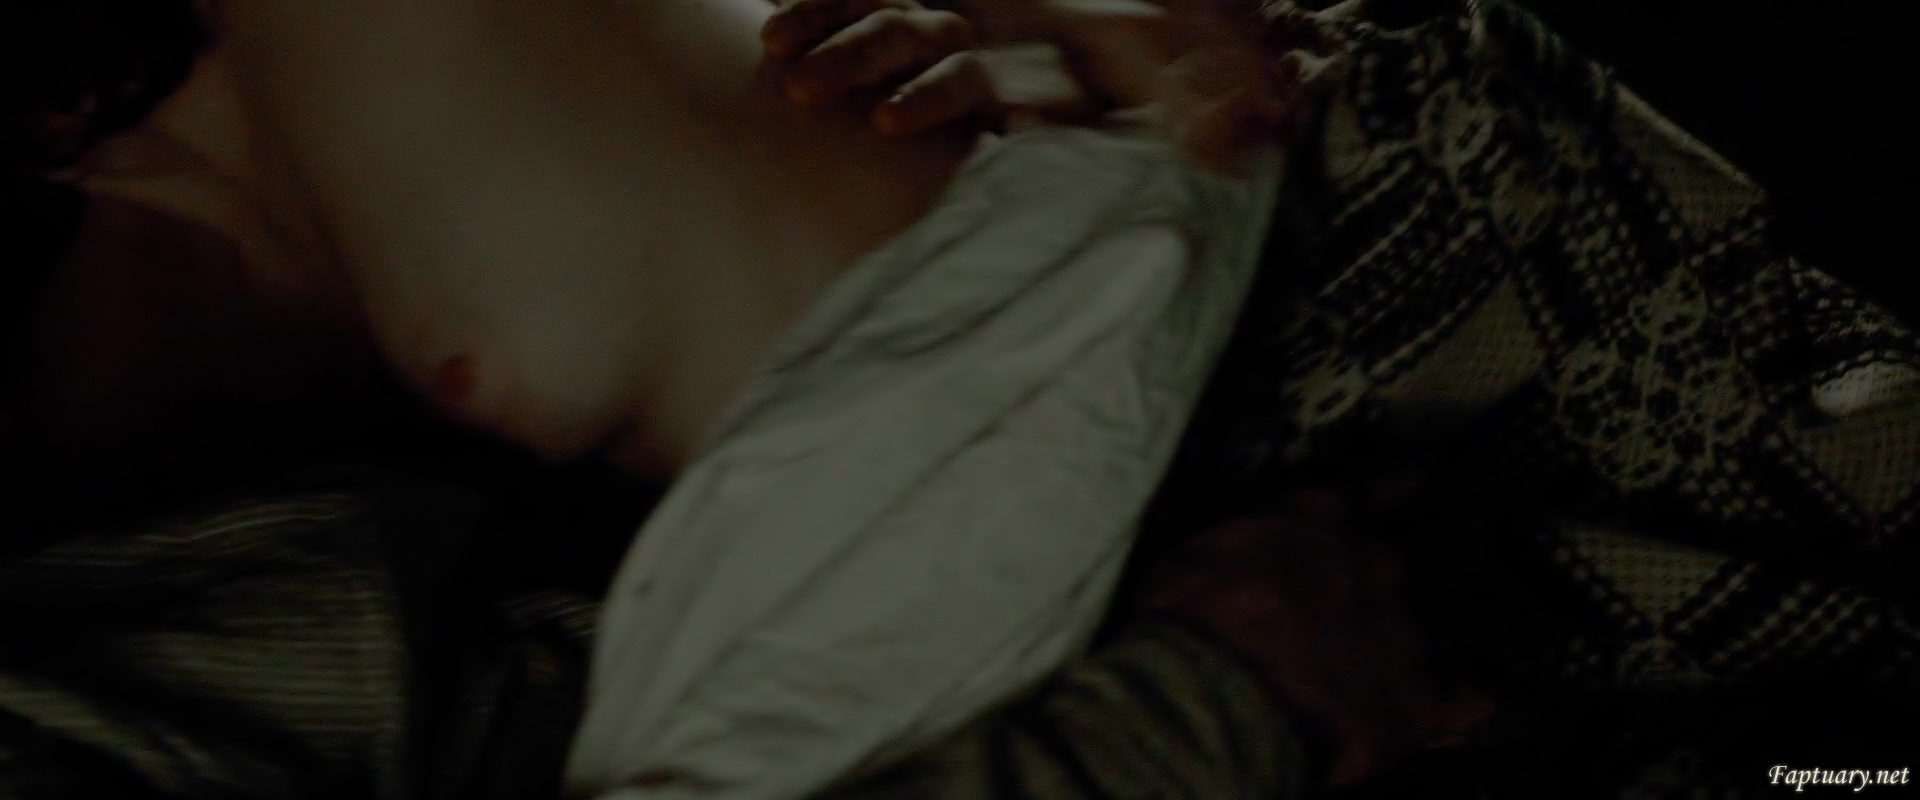 Emerald recomended jessica chastain nude only boobs scene